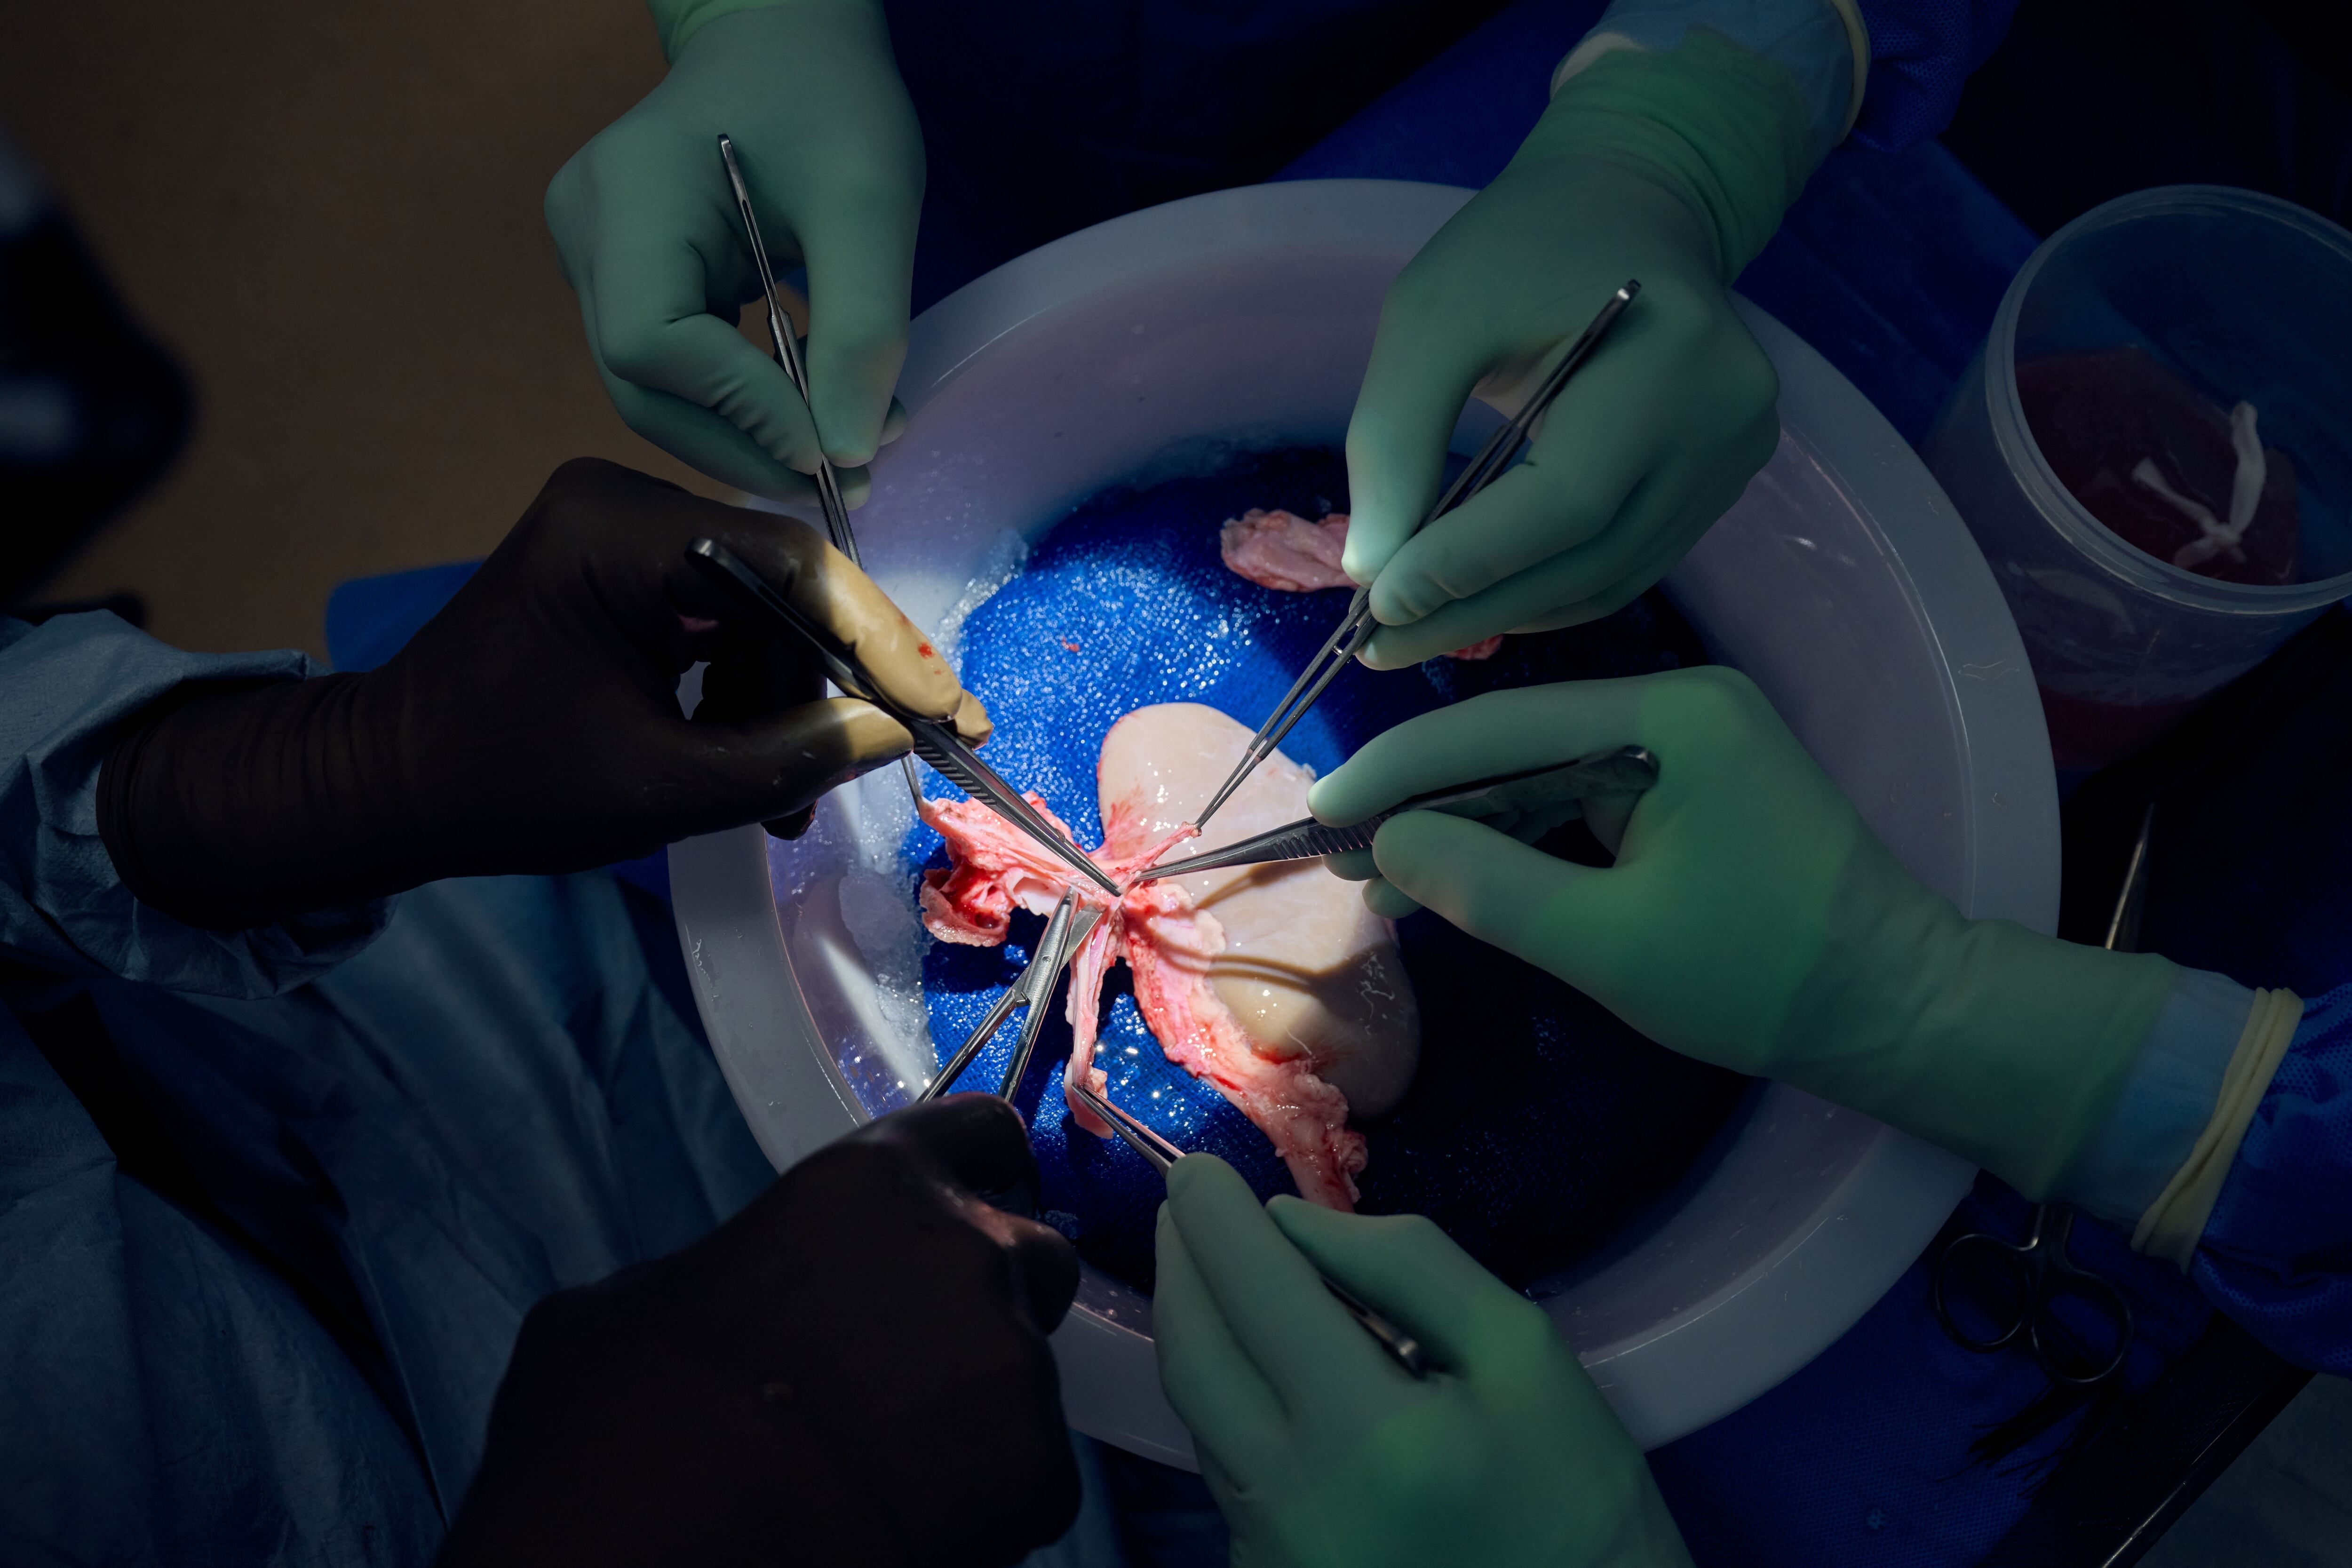 Caption: Tissue from the pig kidney is examined and removed in preparation for transplant.  Credit: Joe Carrotta for NYU Langone Health